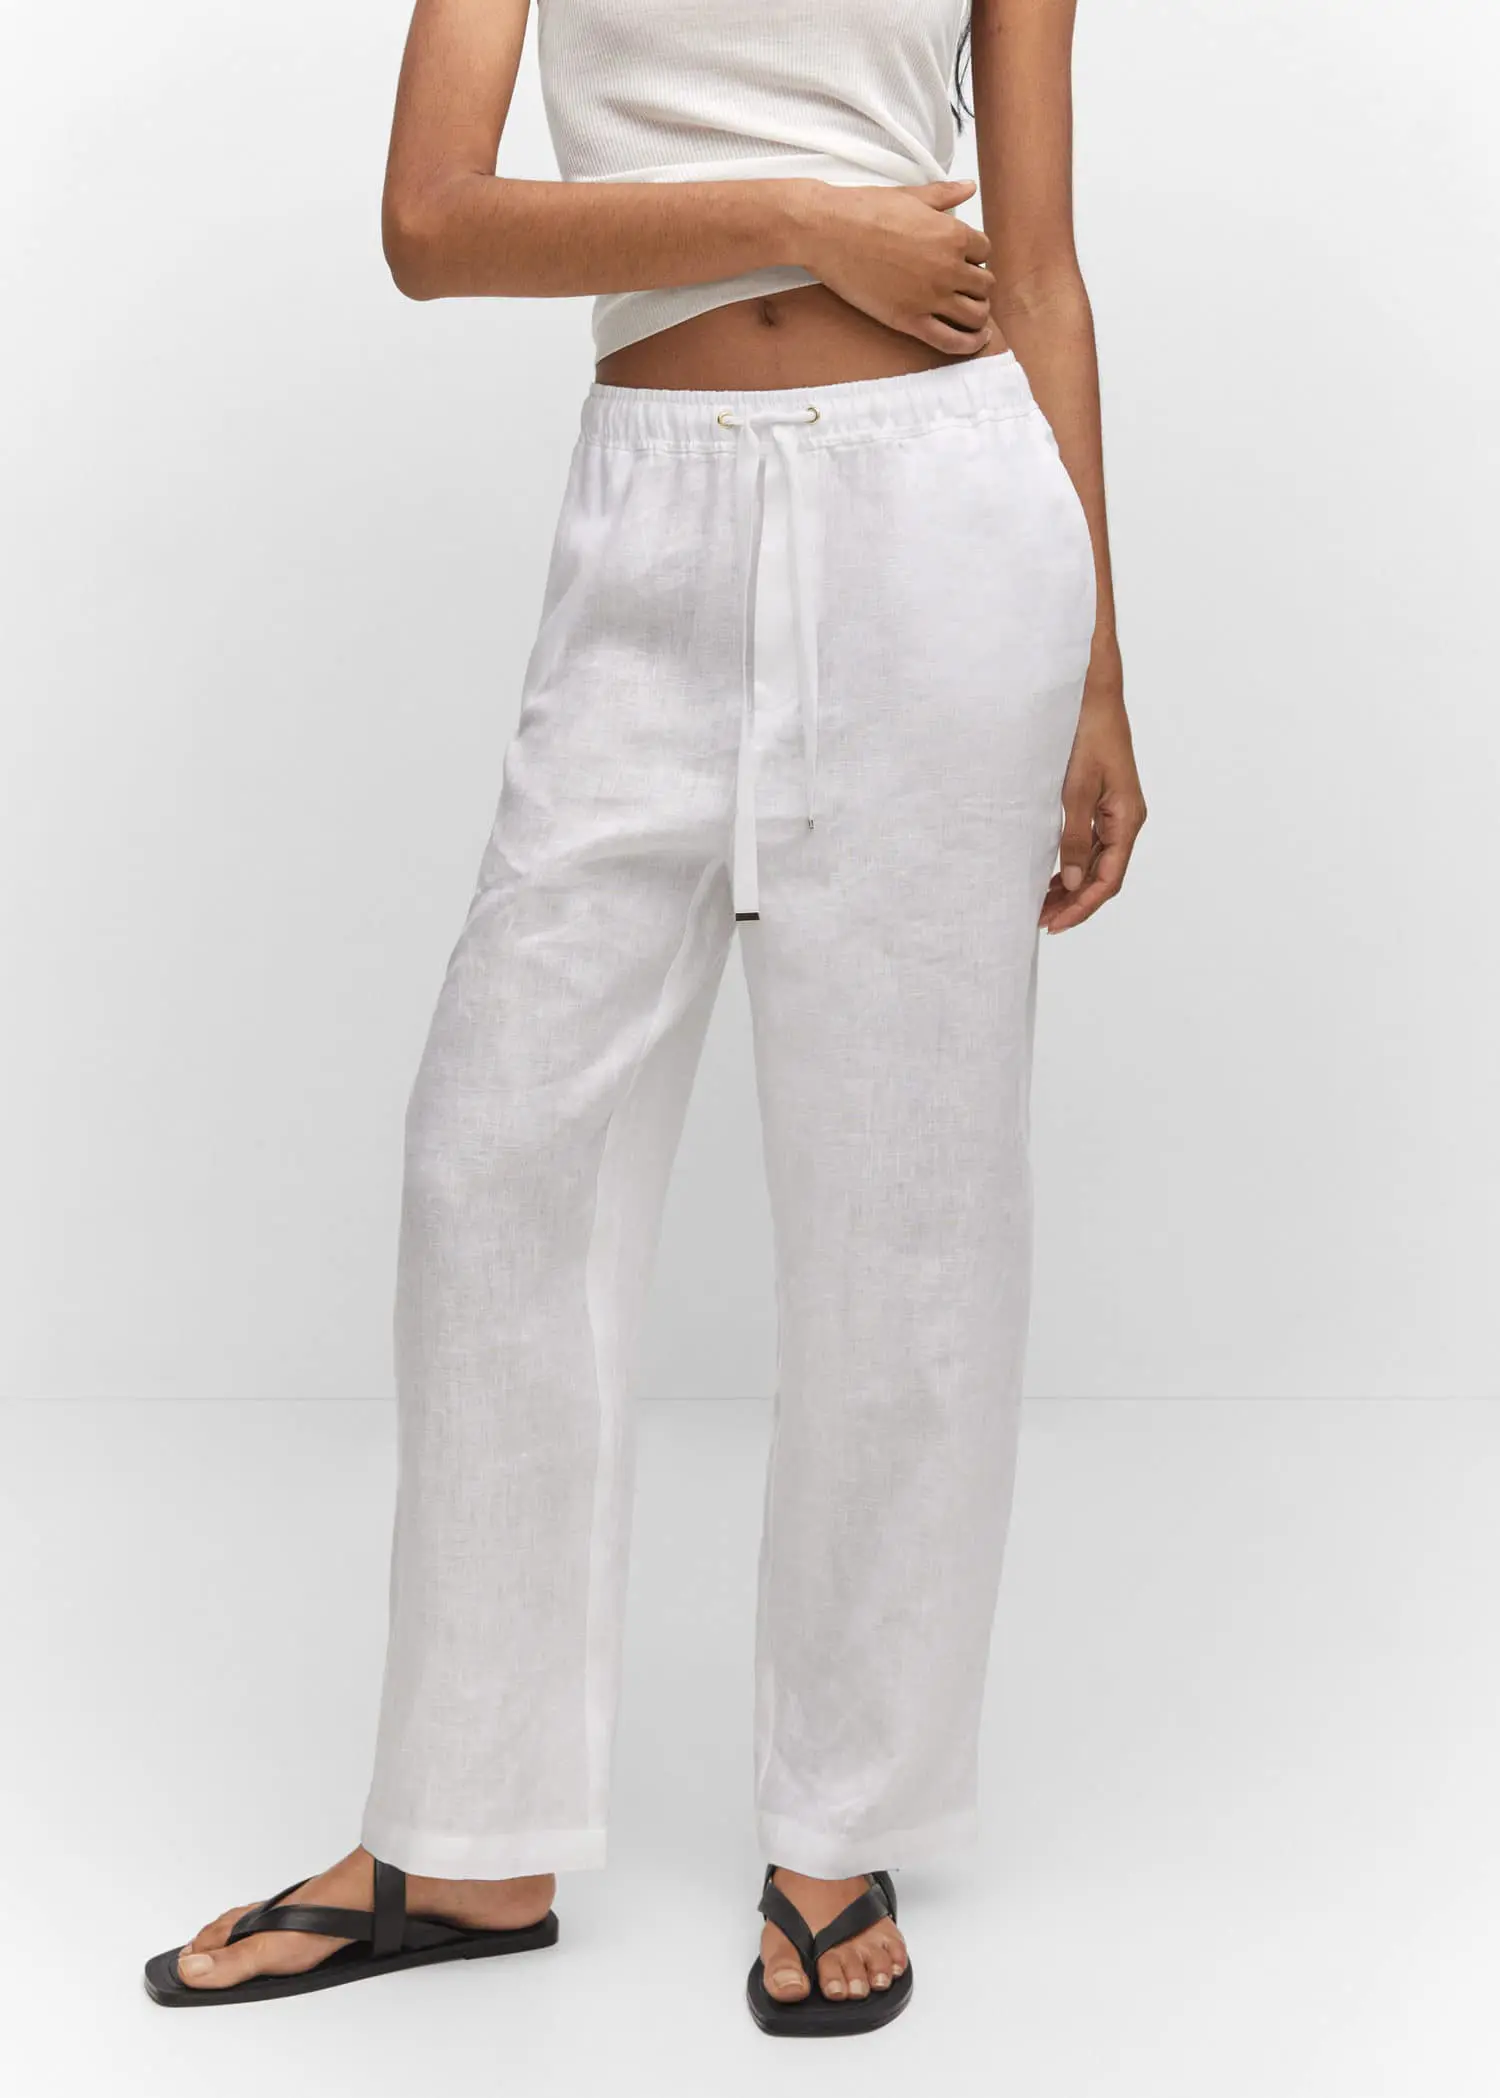 Mango Bow linen trousers. a woman wearing white pants and a white top. 